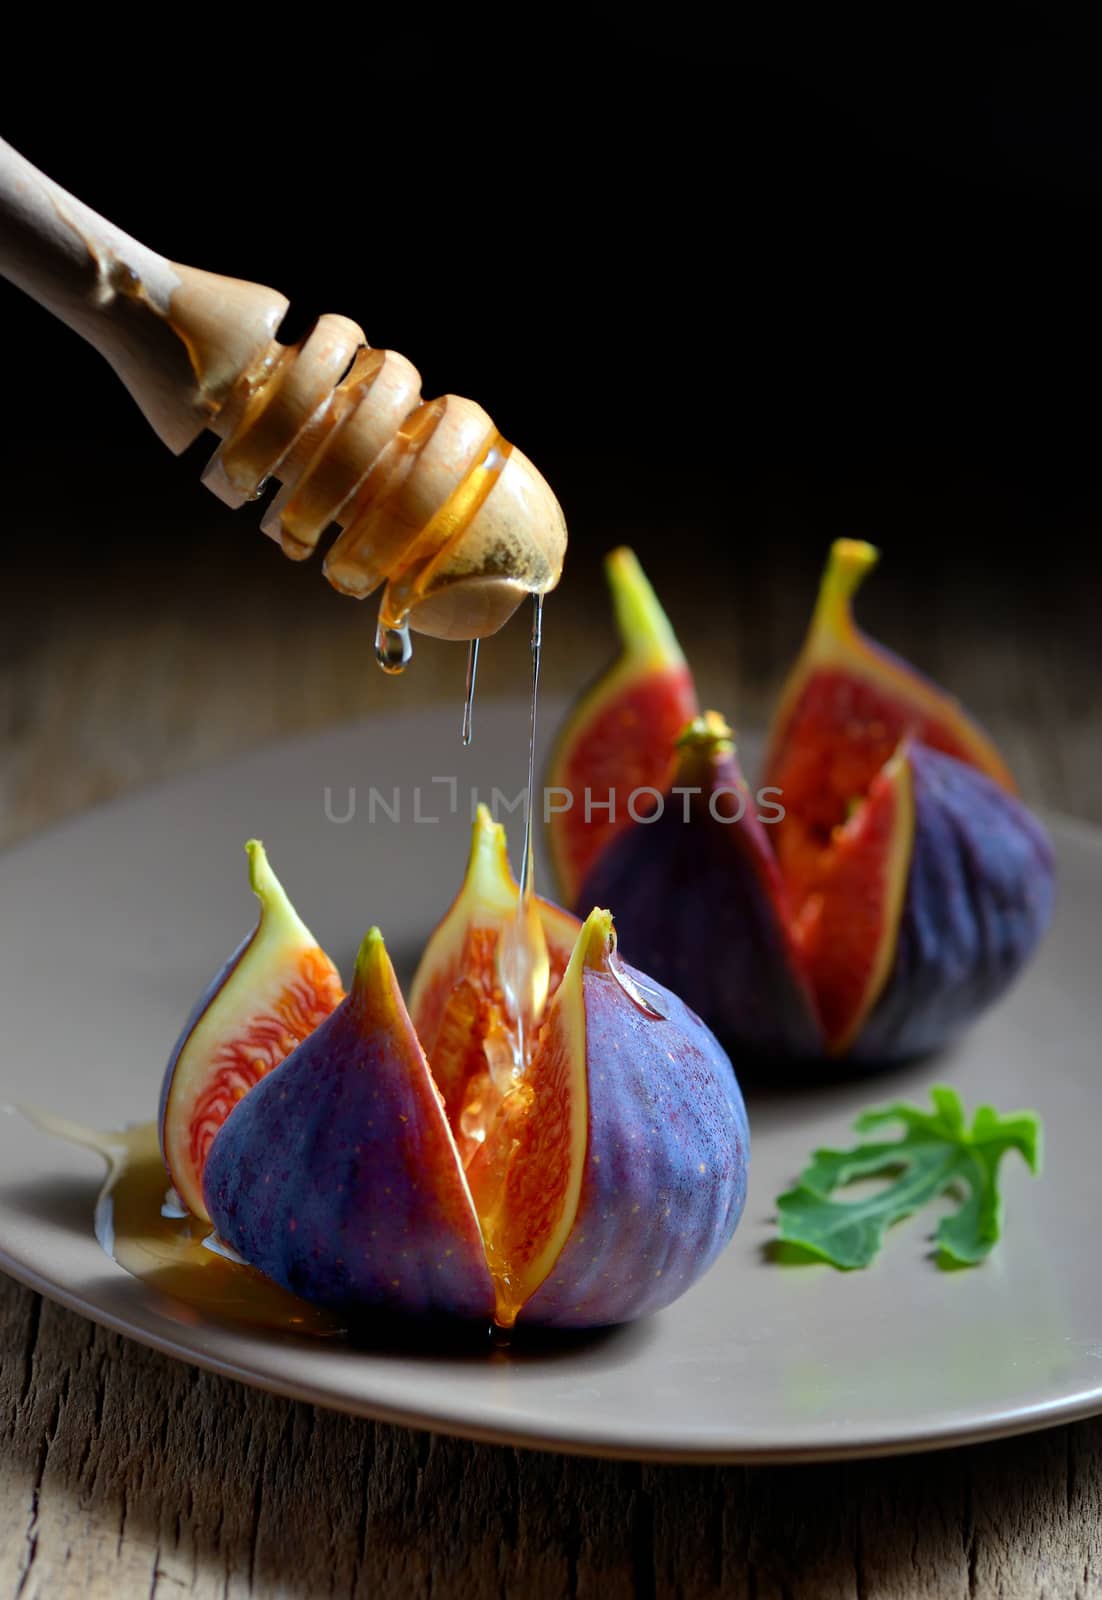 Honey dipper and figs on plate